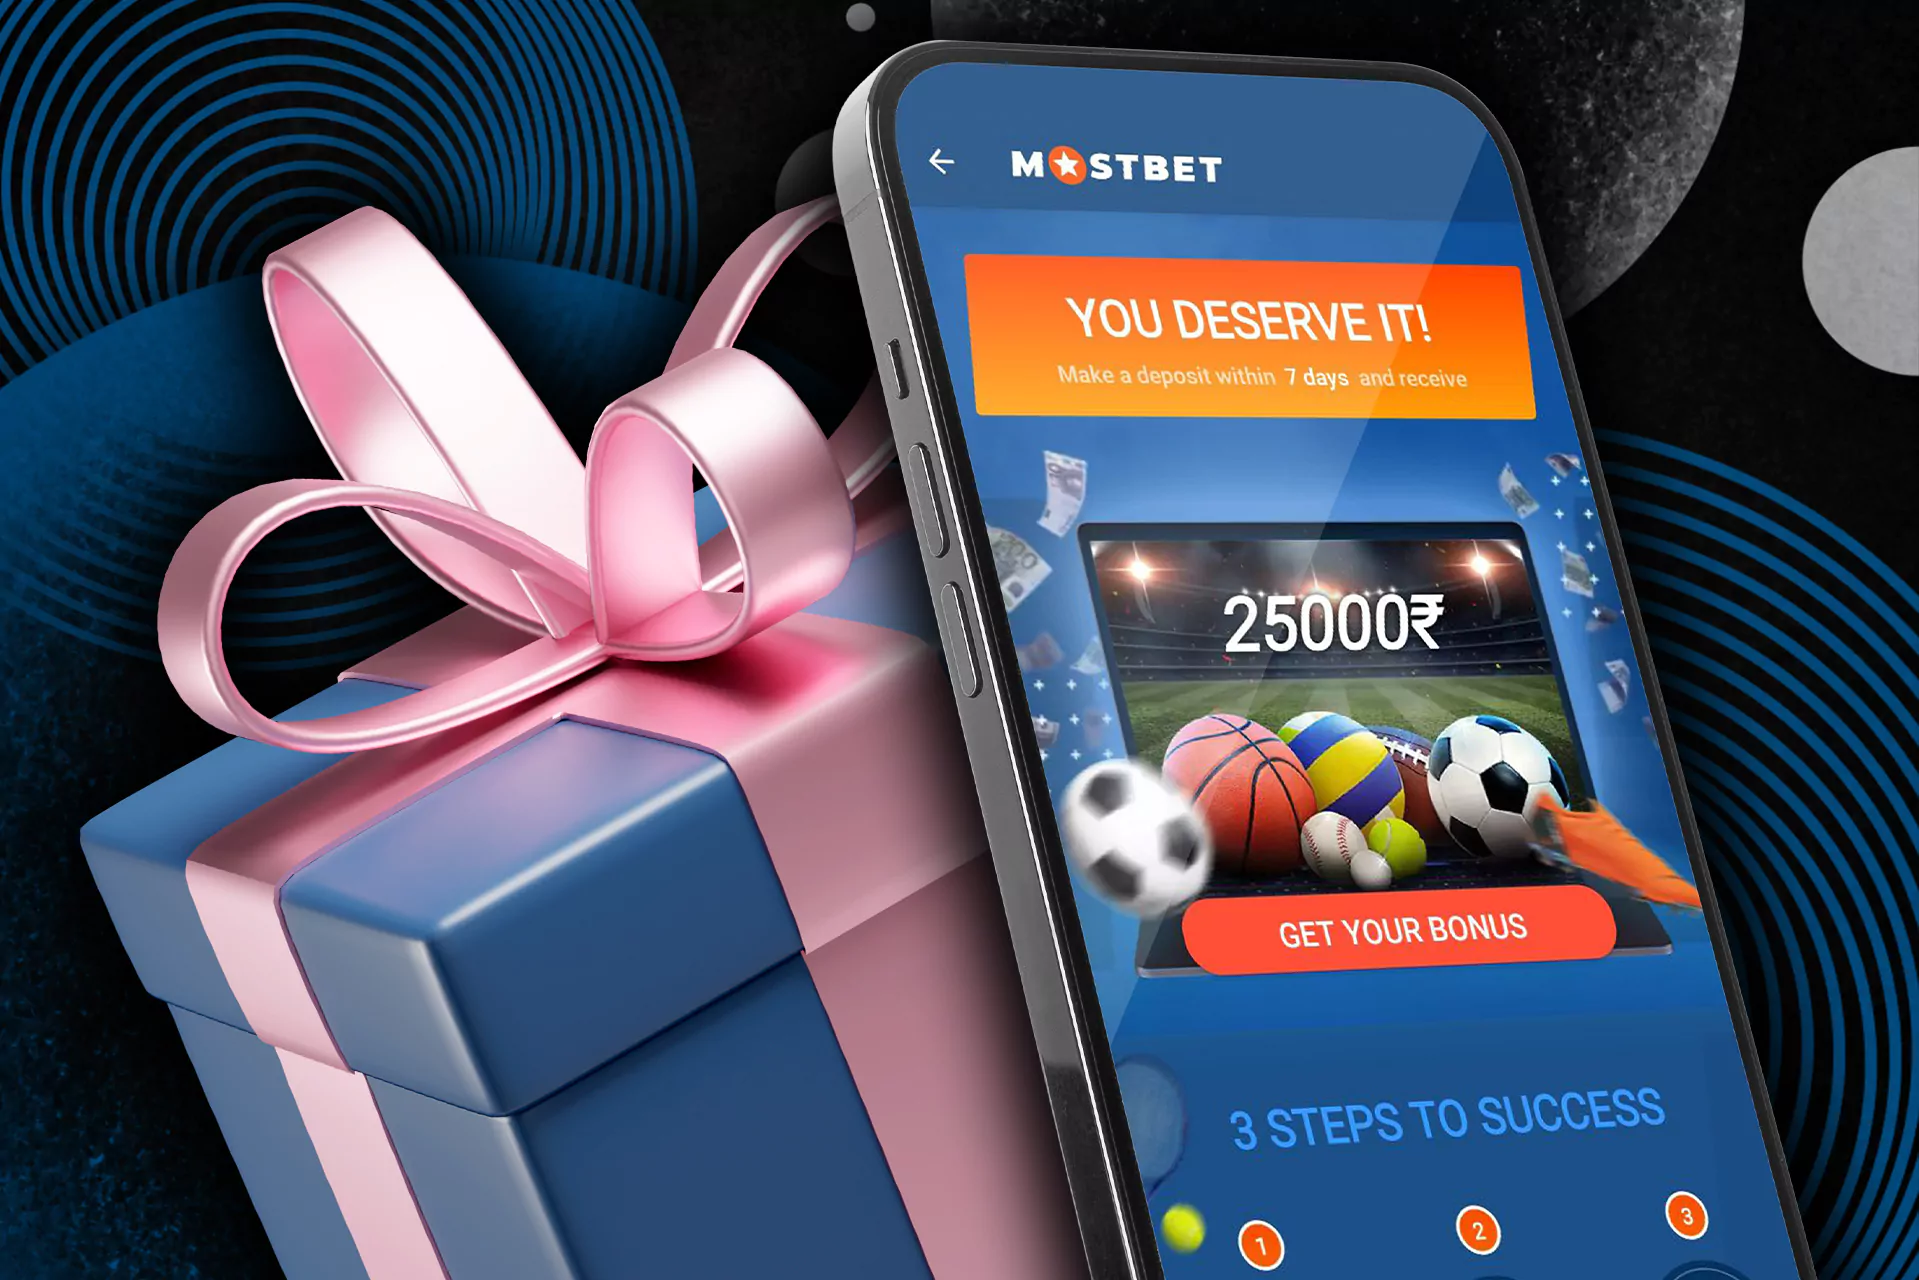 You deserve it: get your 25,000 BDT bonus for the ssports betting.